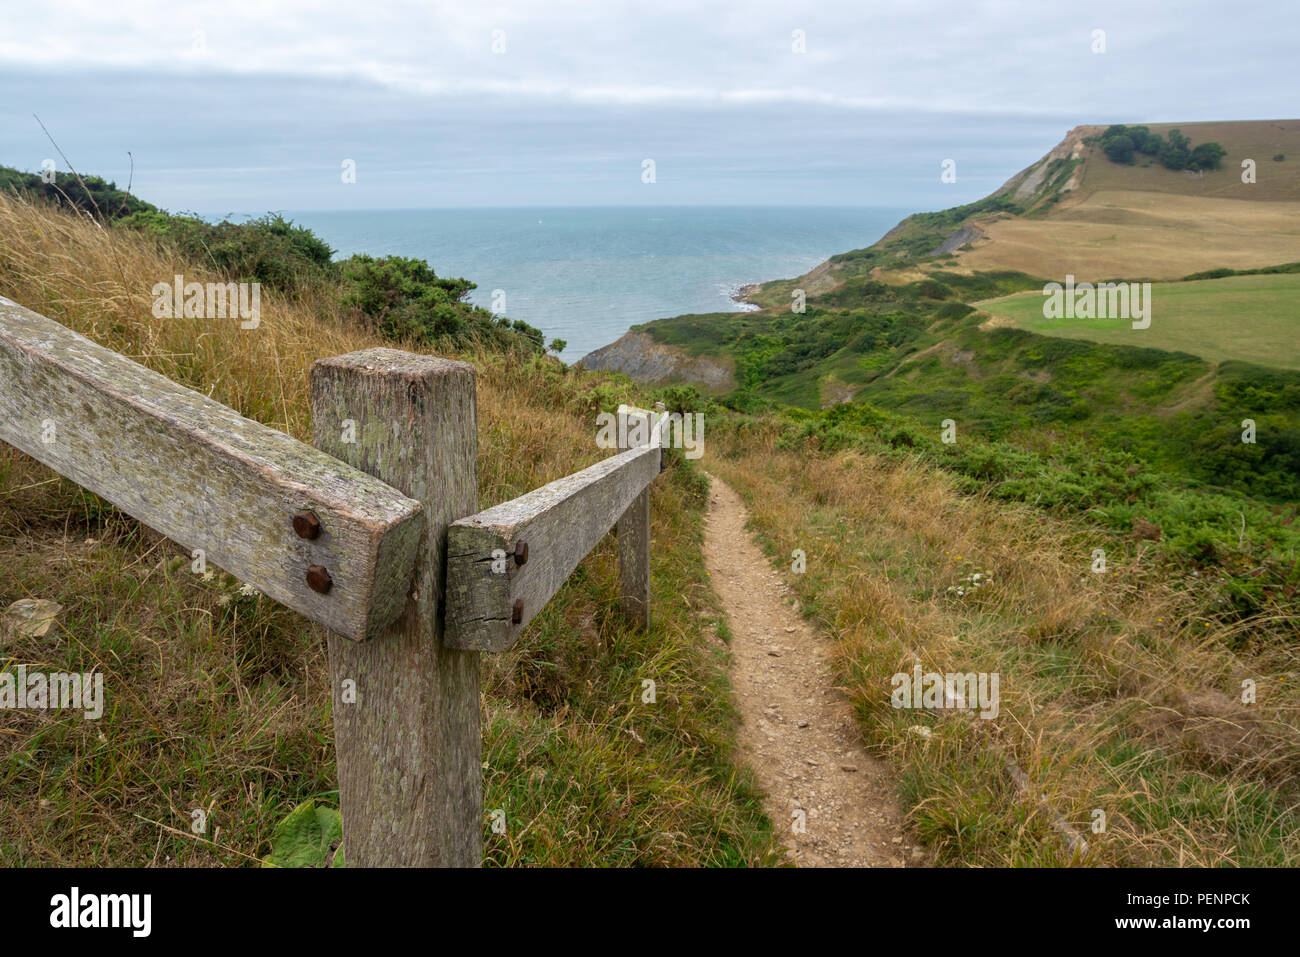 Footpath alongside a fence on the way down to Chapman's Pool, Jurassic Coast, Purbeck, Dorset, England, UK Stock Photo